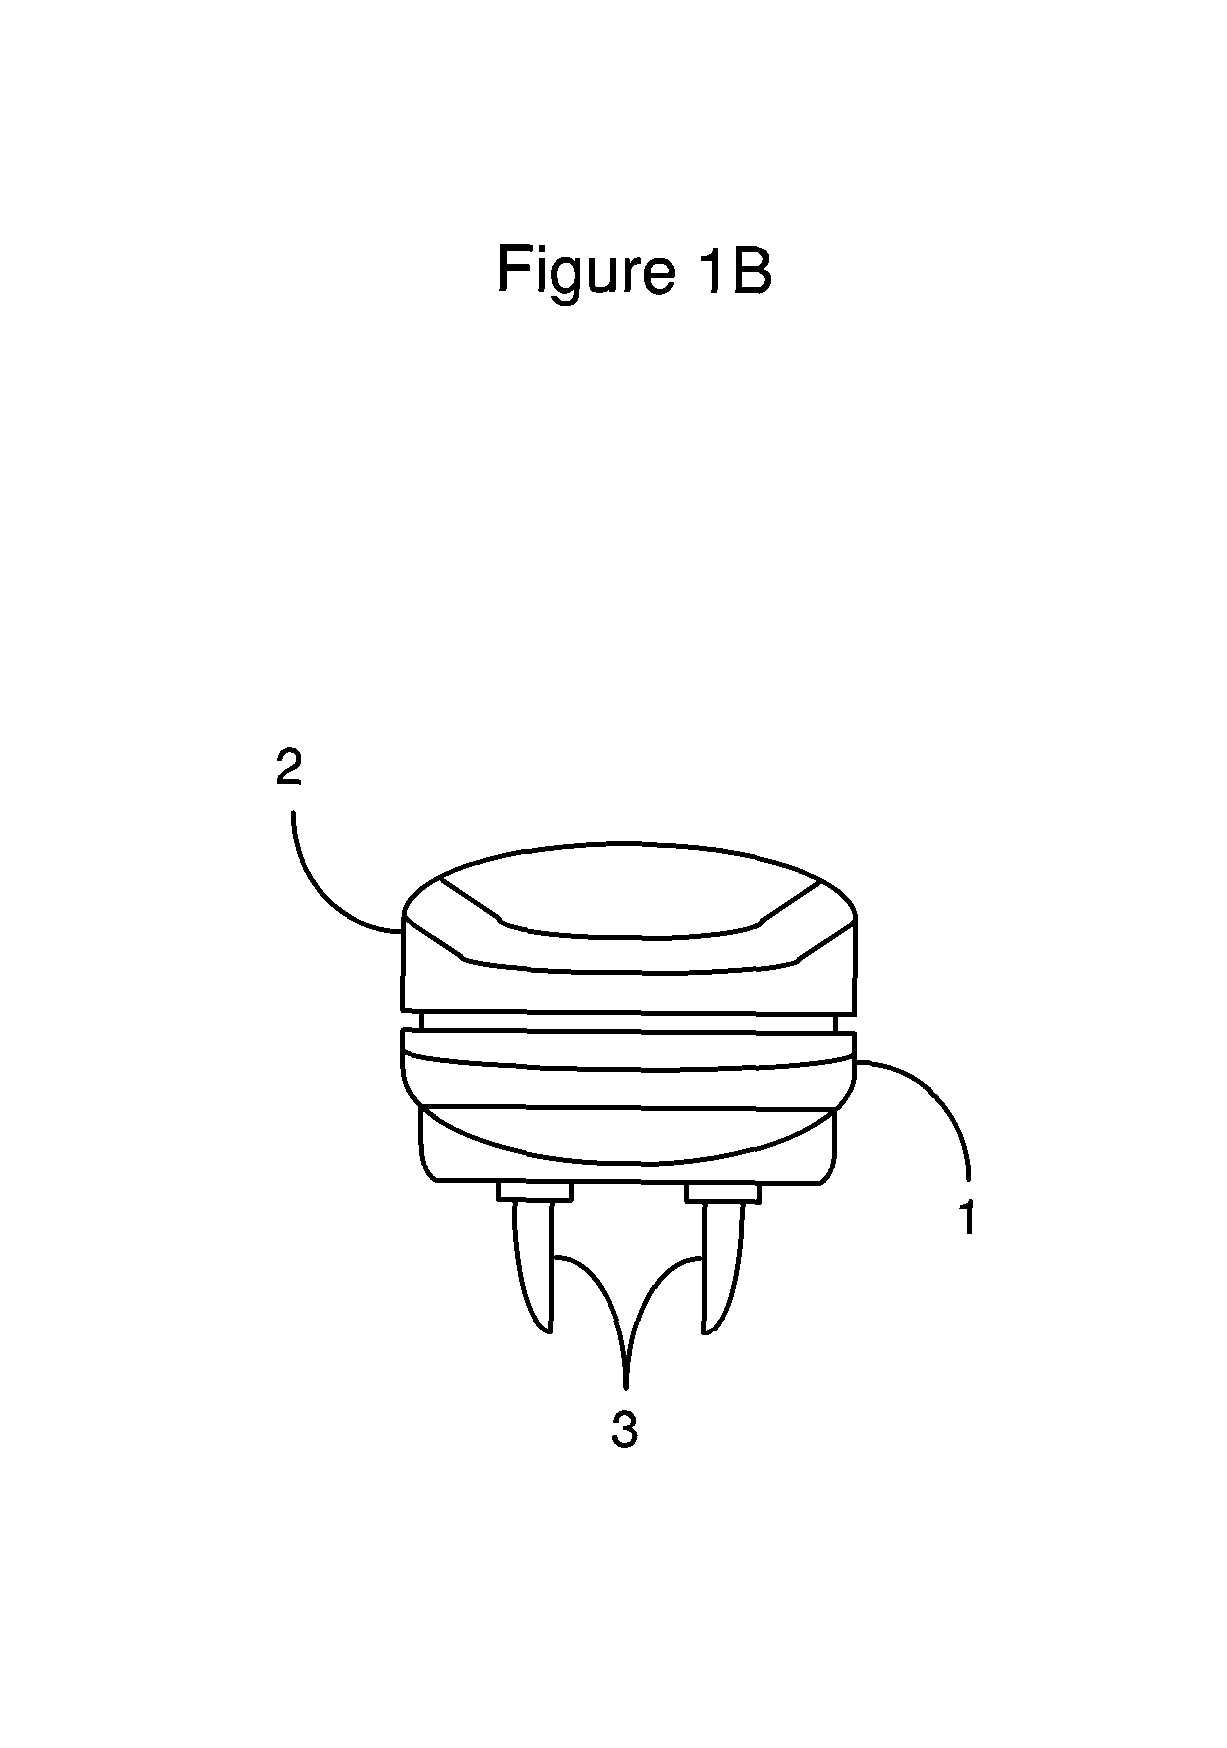 Apparatus and method for stimulating hair growth